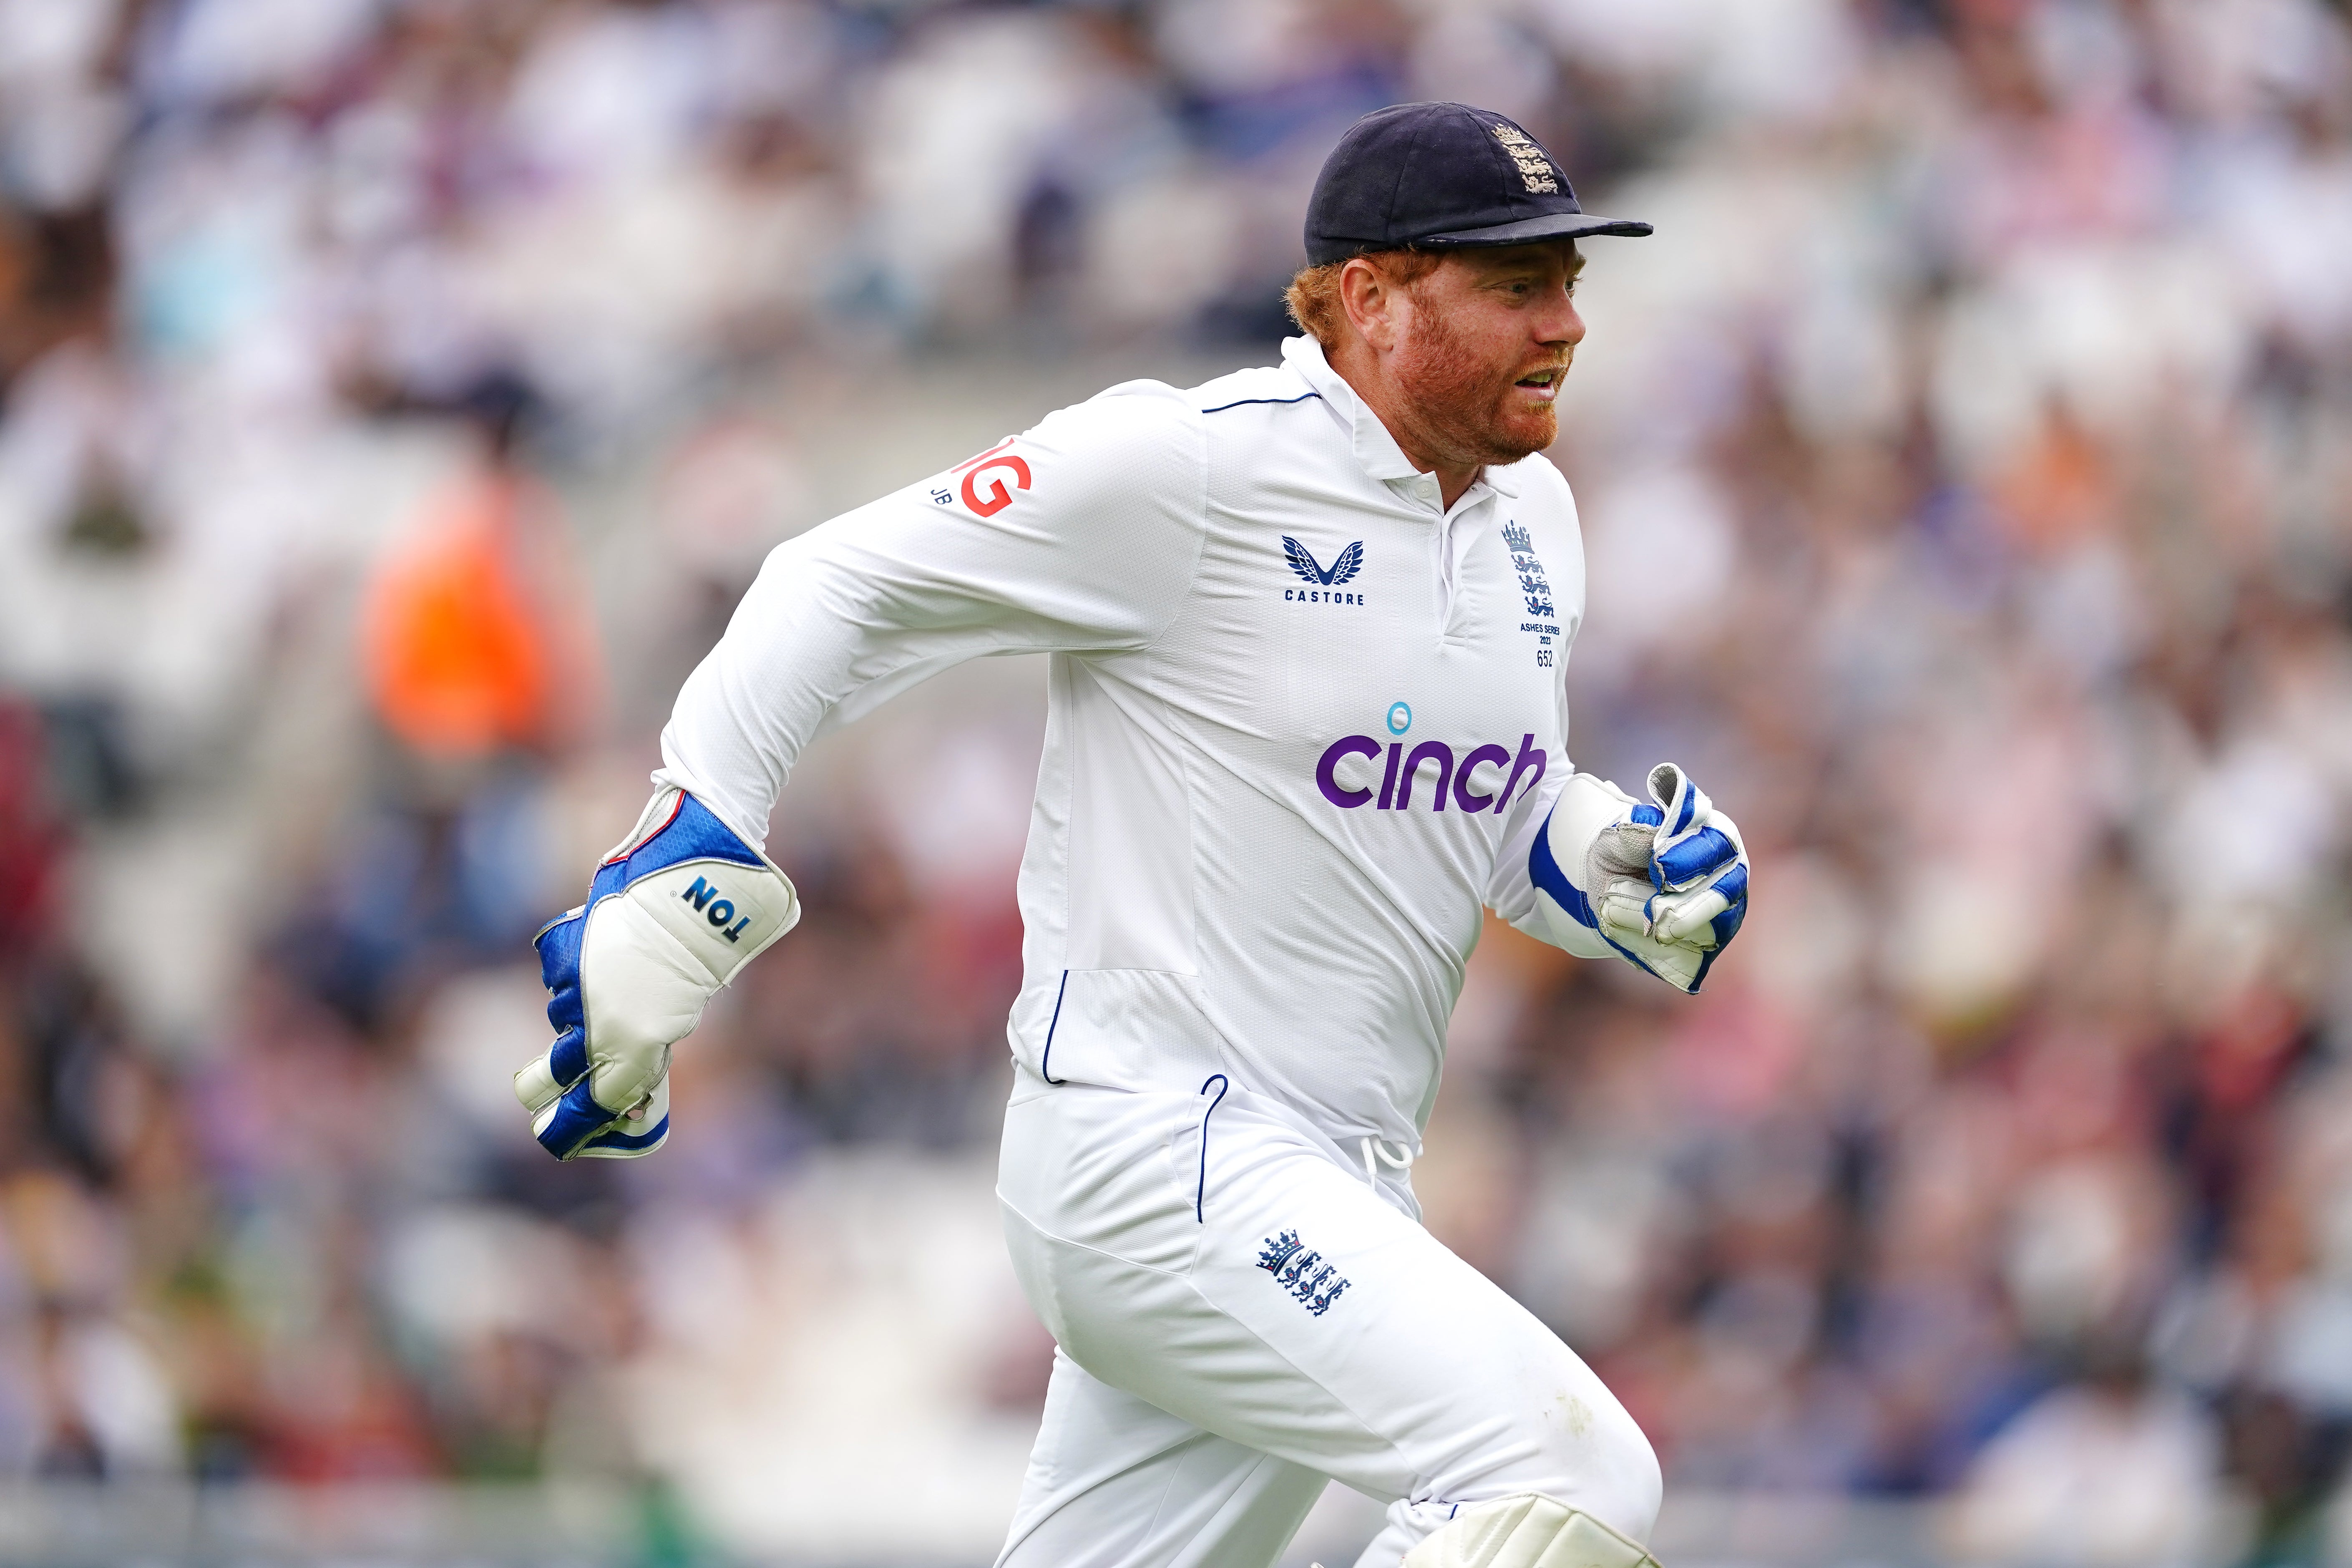 pa ready, england, shoaib bashir, brendon mccullum, ollie robinson, west indies, james anderson, ben stokes, jonny bairstow, matthew potts, ben foakes, india, jack leach, ashes, somerset, stuart broad, ireland, durham, england shake up test squad with three uncapped players for west indies series